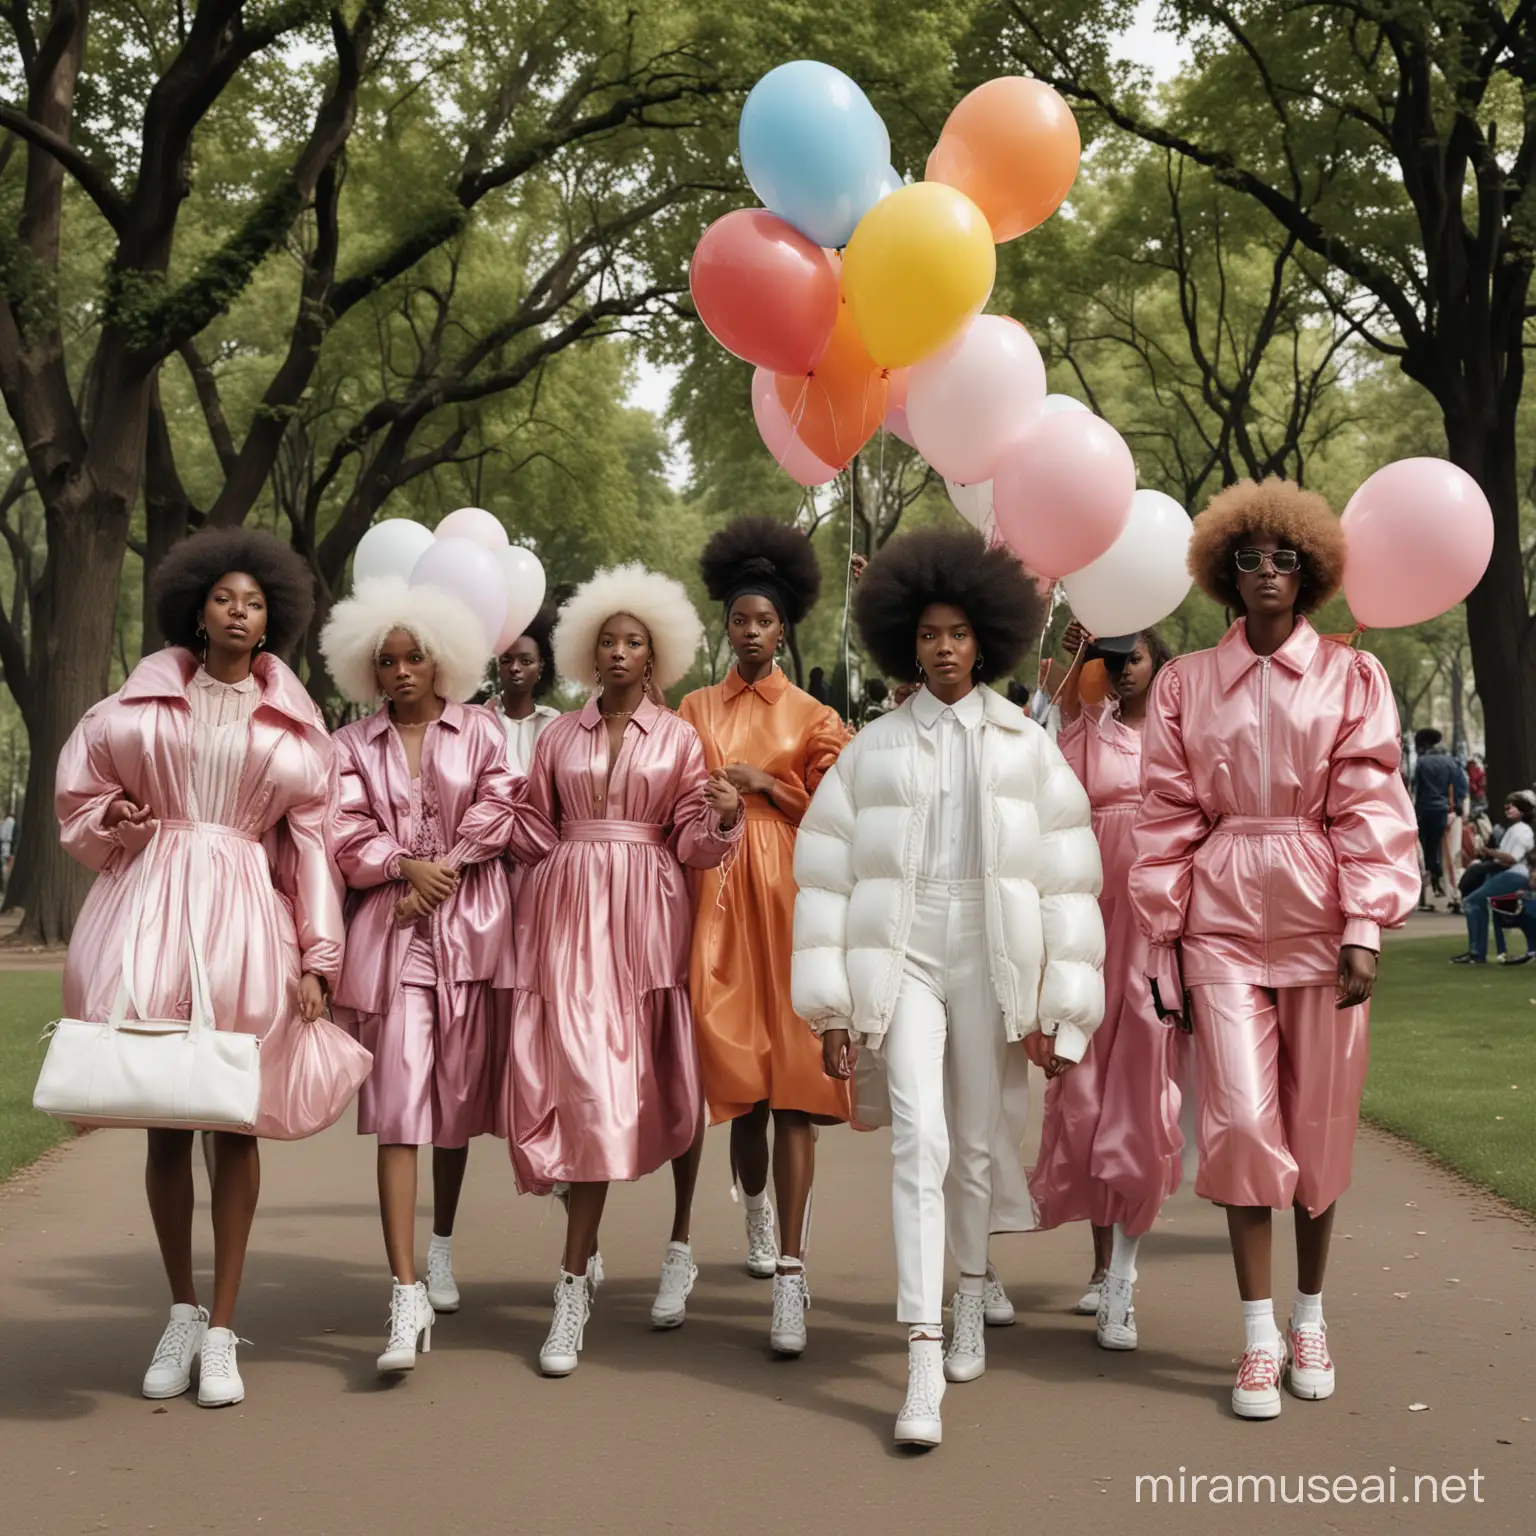 Show me a Balenciaga ad campaign with adults in a park playing like children with balloons. The adults are diverse (afros, whites, Asians, etc.) and are dressed in Balenciaga.